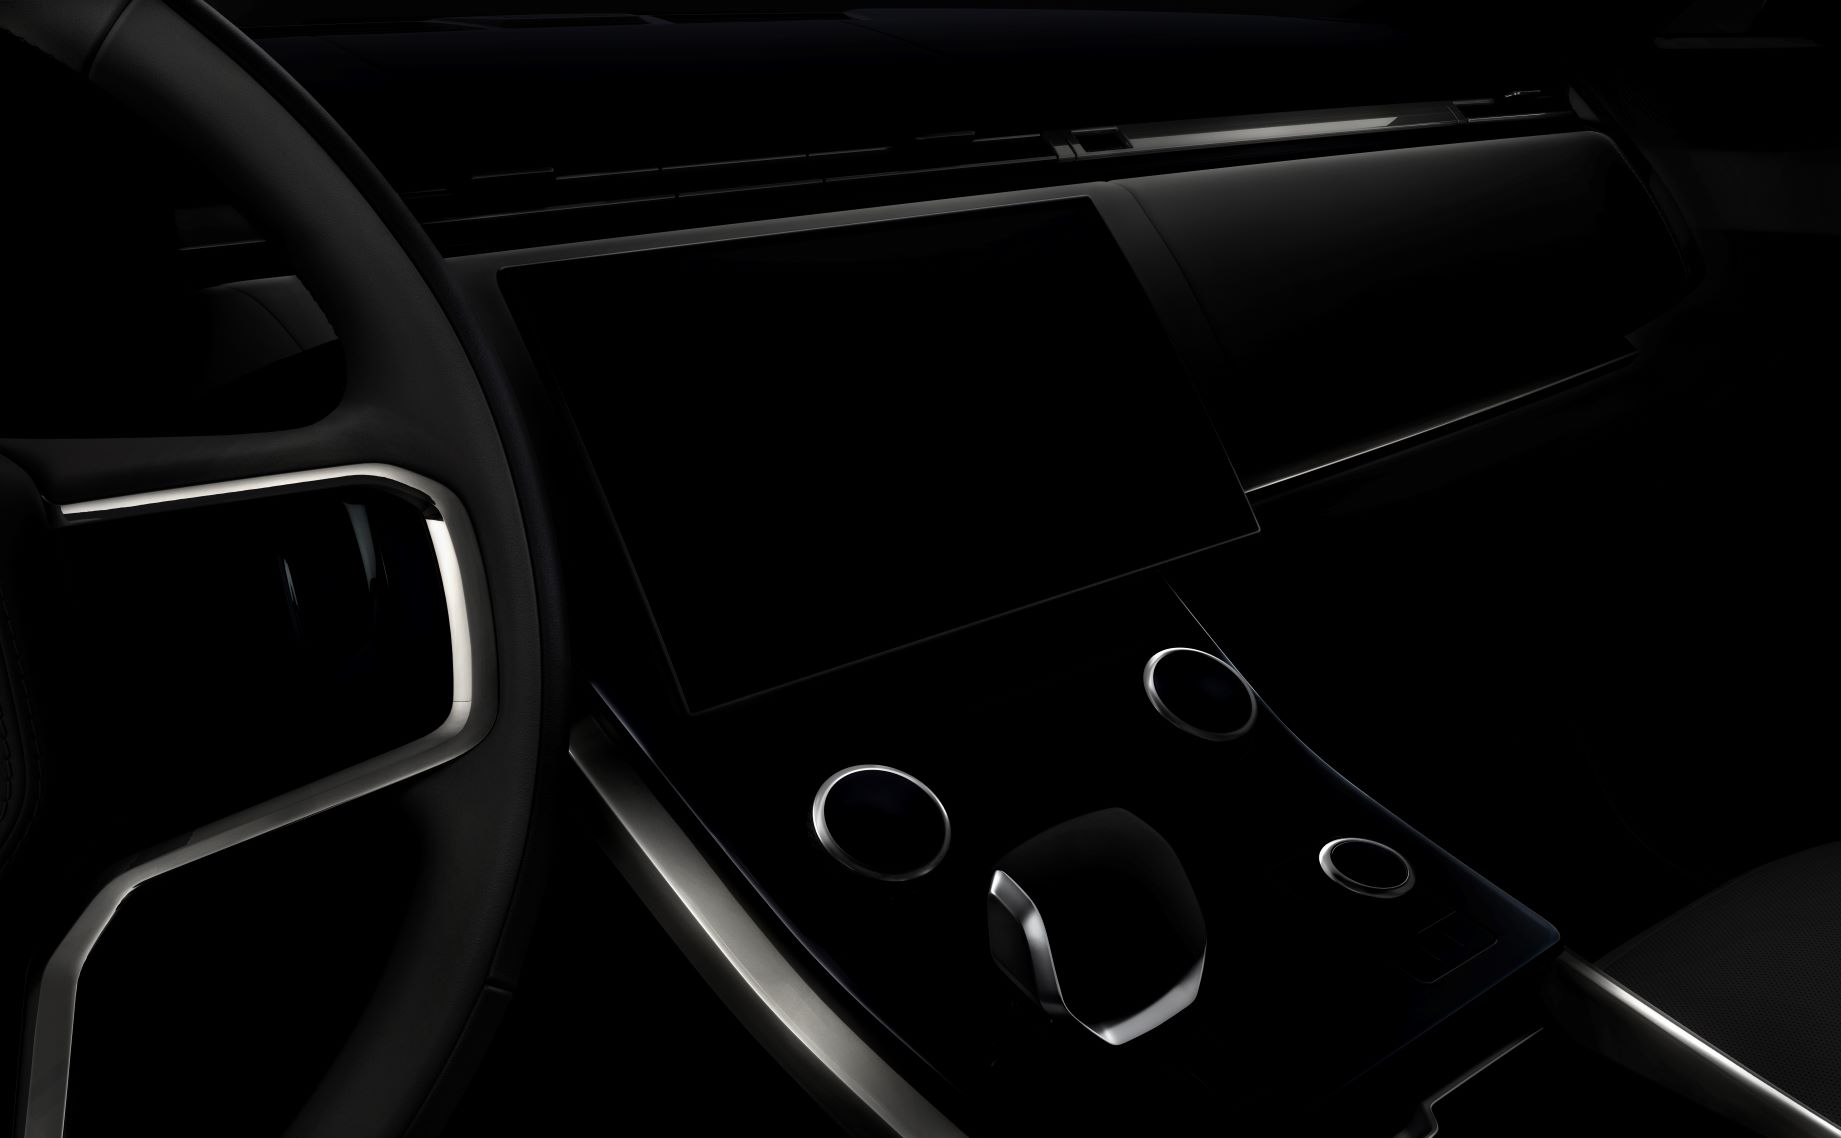 Teaser image of the interior of the new Range Rover Sport